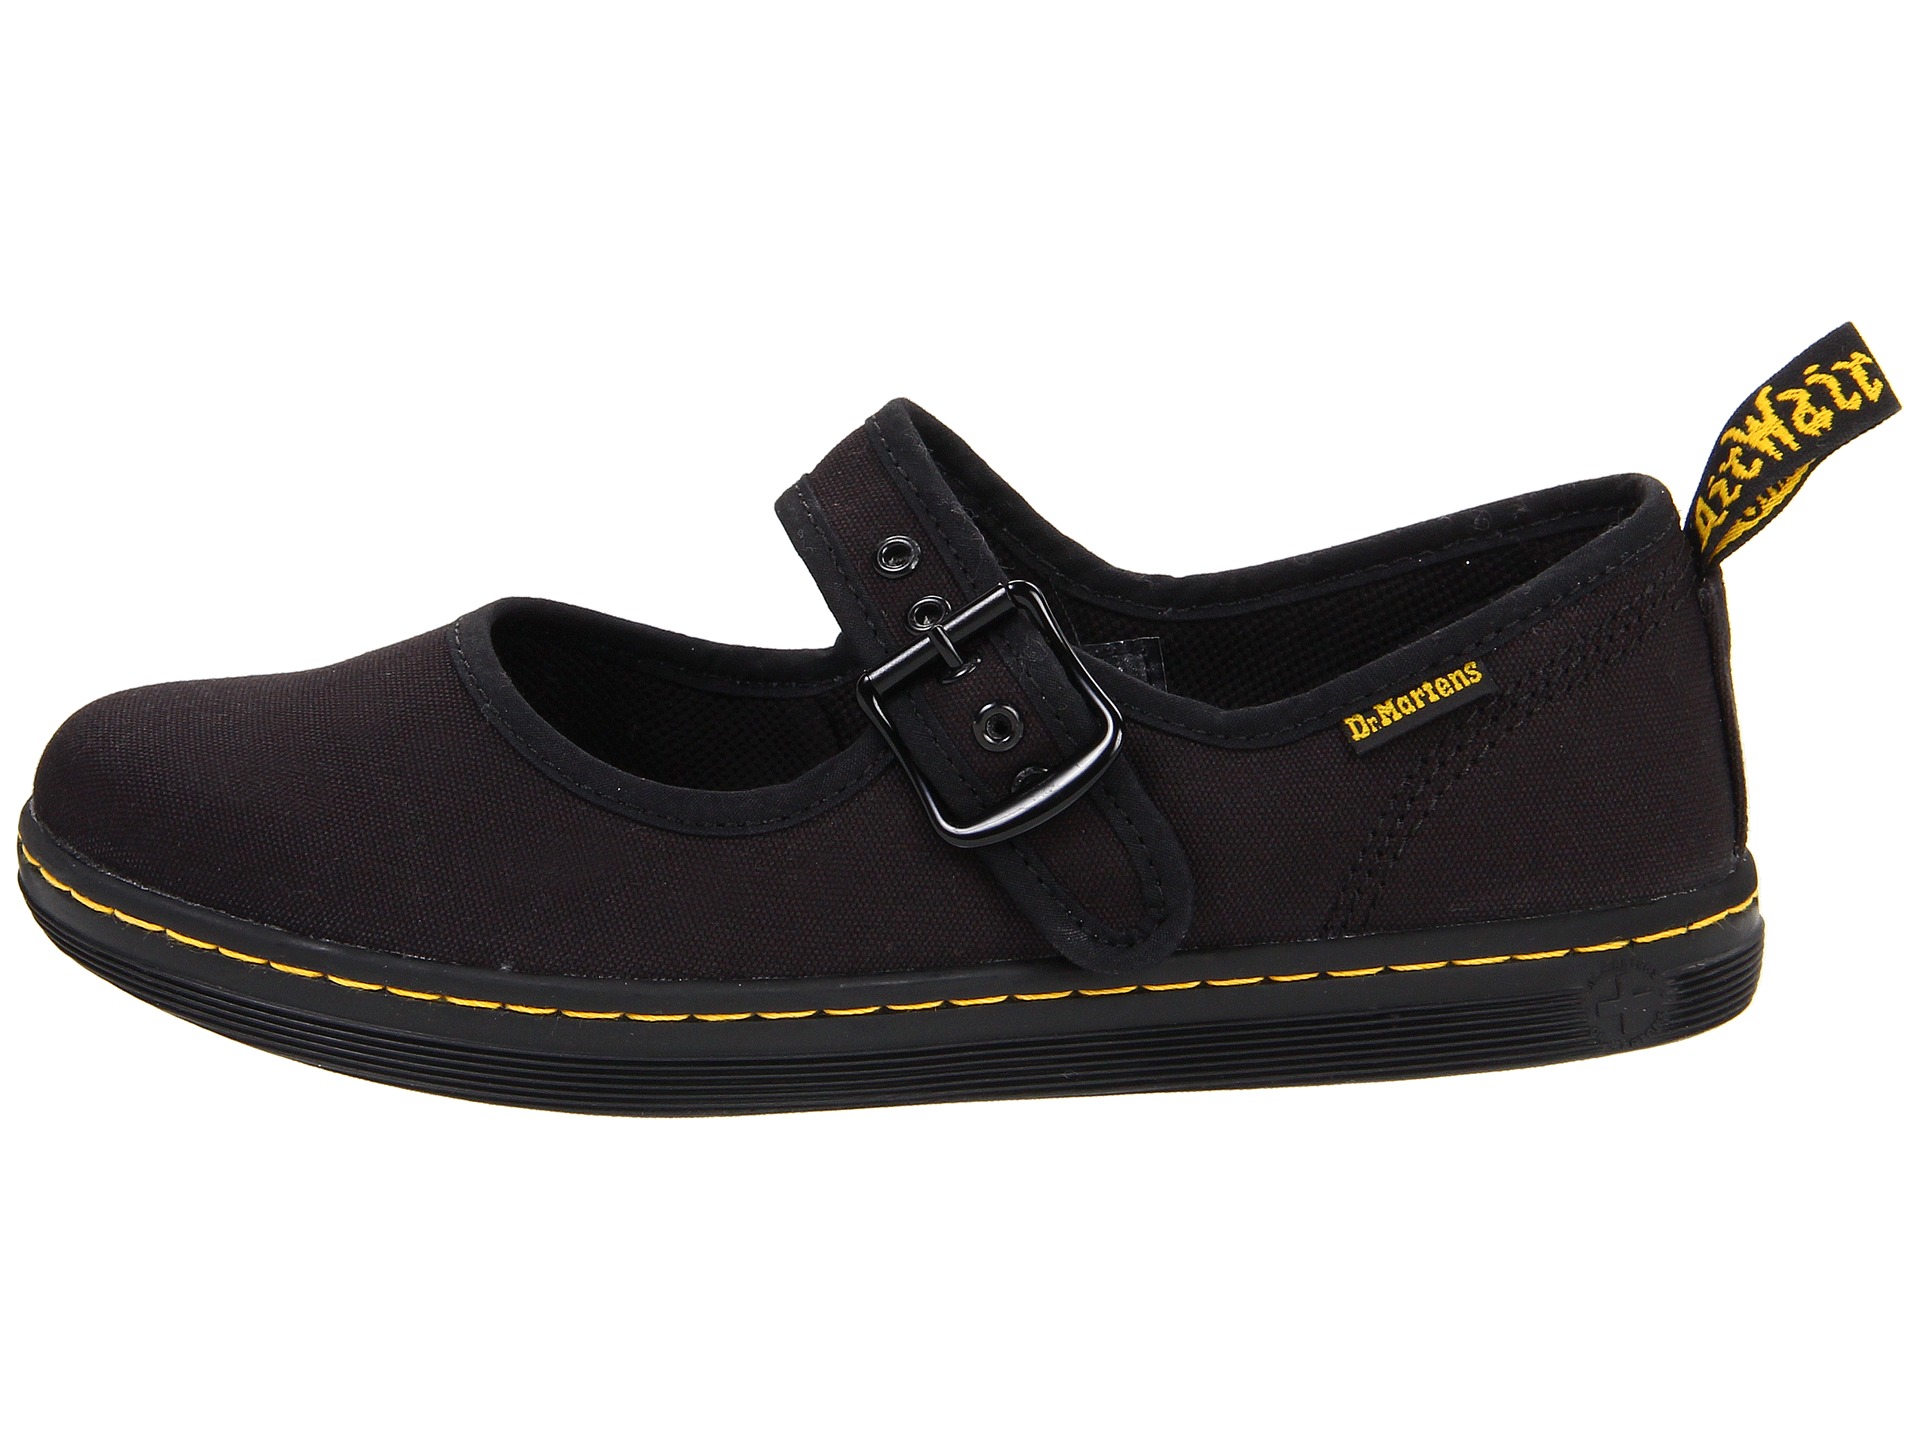 Dr. Martens Carnaby Mary Jane - Zappos.com Free Shipping BOTH Ways